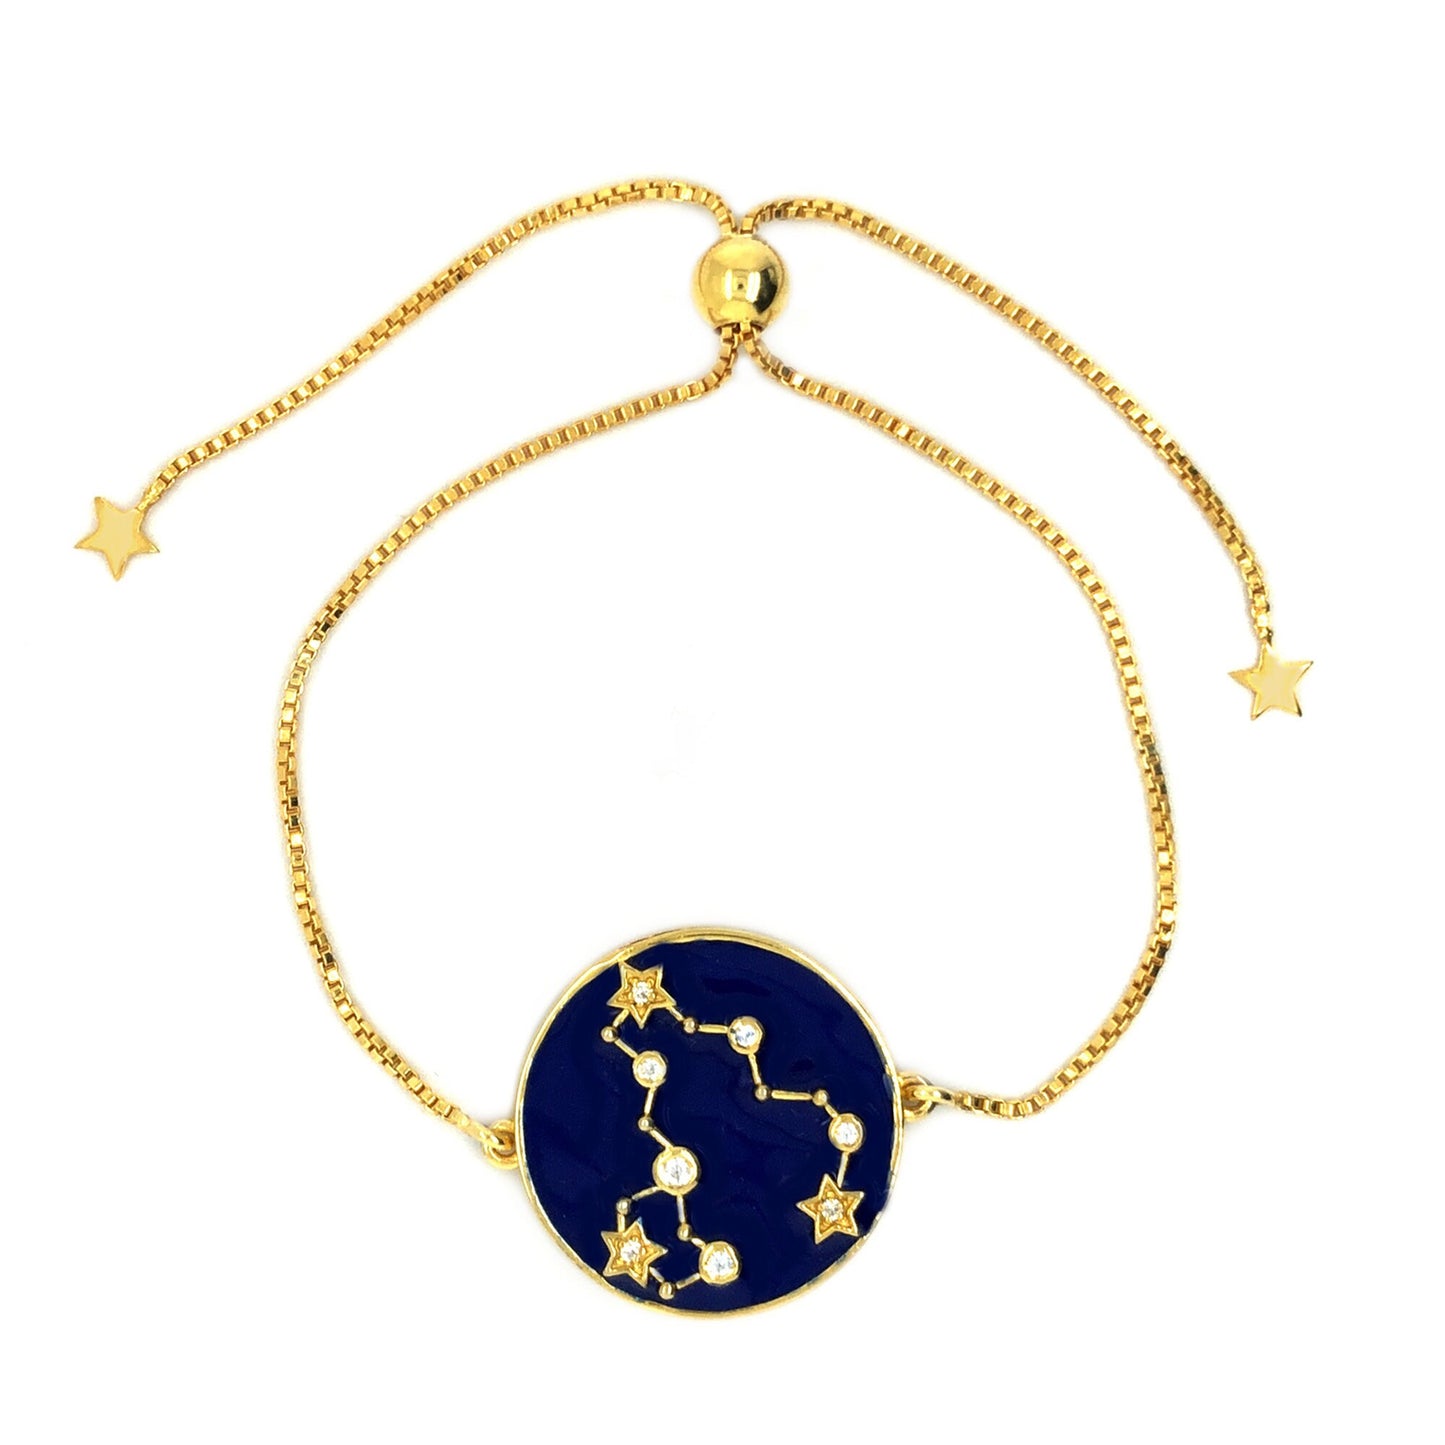 Natural White Zircon And Blue Enamel Zodiac Constellation, 925 Sterling Silver Over Gold Plated Circle Bolo Bracelet, Gift For Her